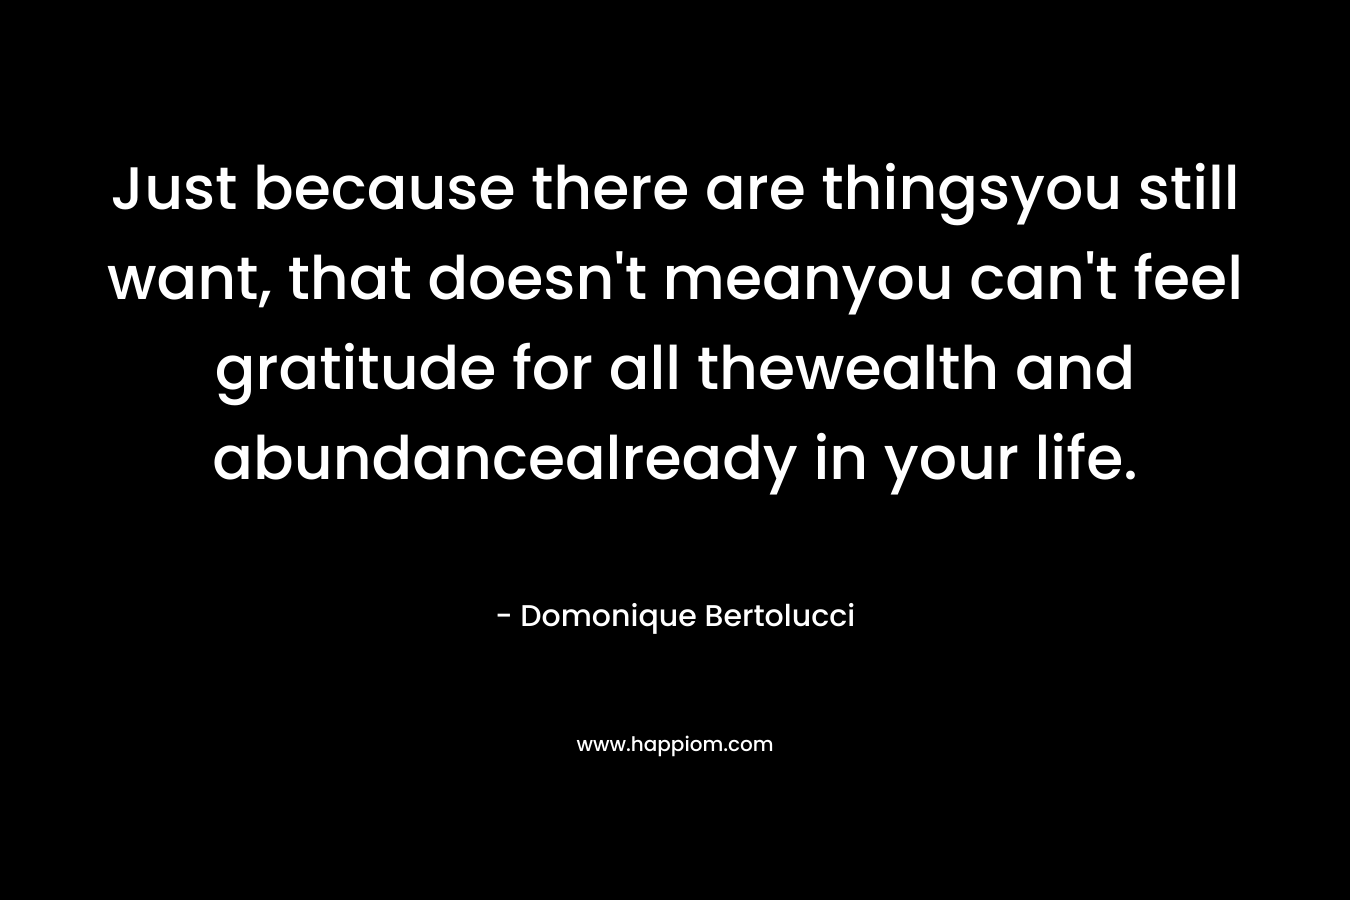 Just because there are thingsyou still want, that doesn’t meanyou can’t feel gratitude for all thewealth and abundancealready in your life. – Domonique Bertolucci